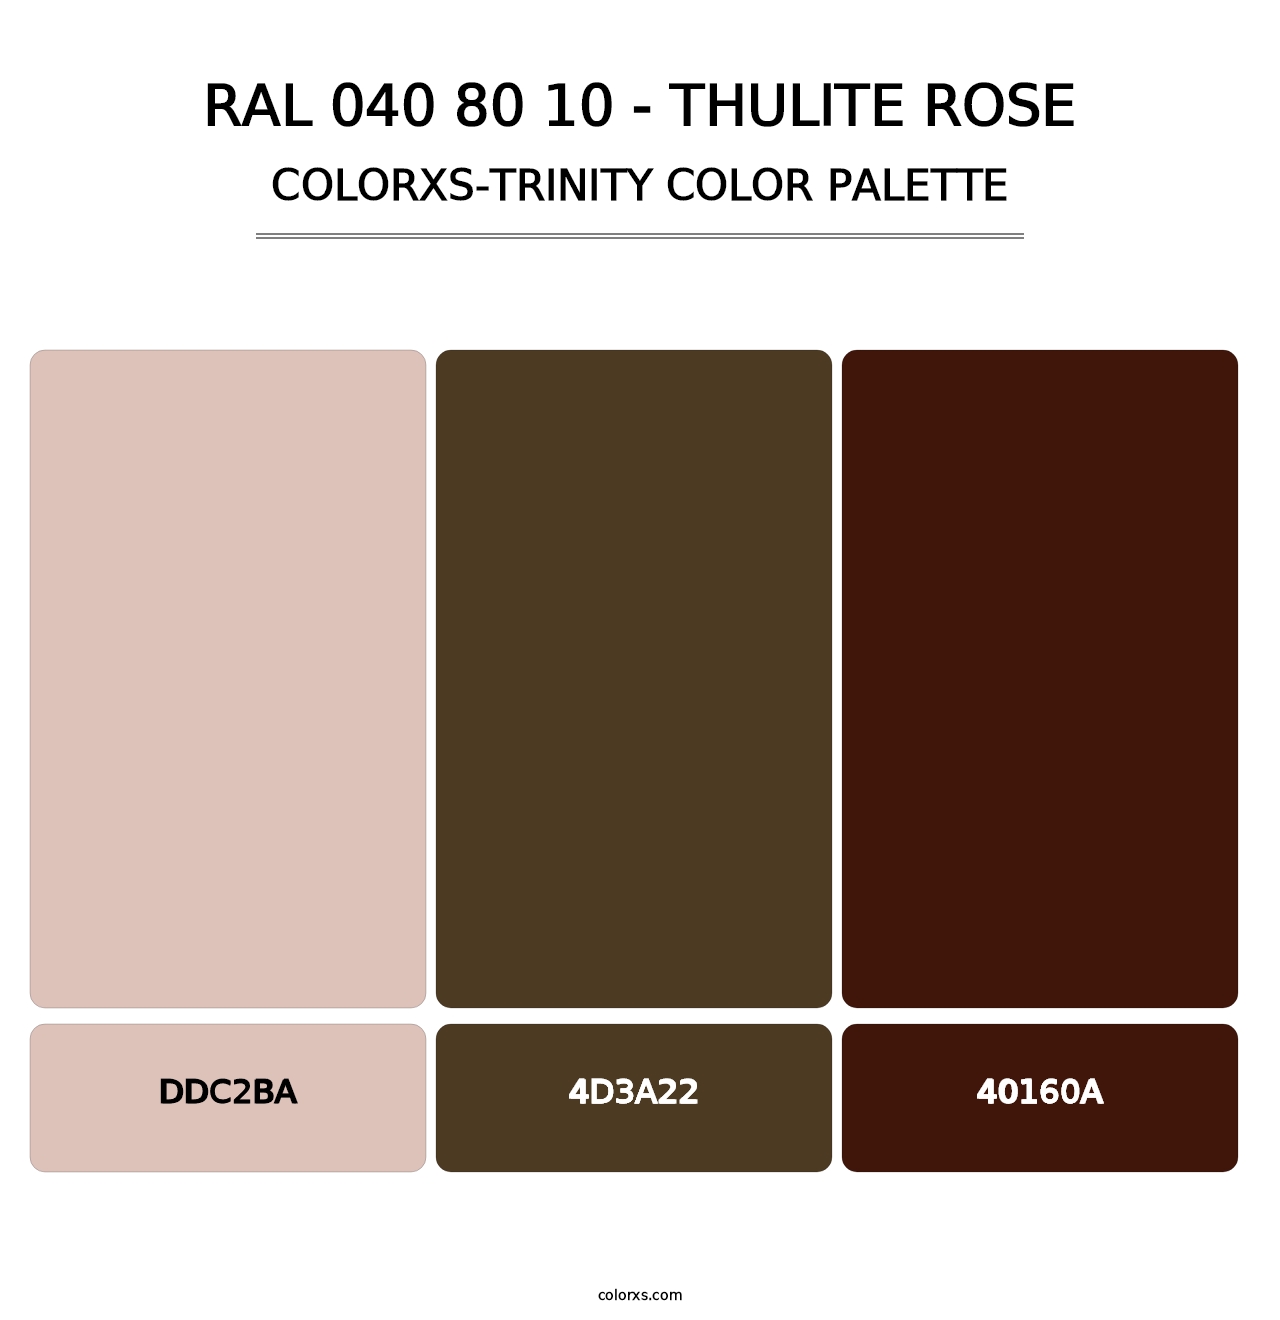 RAL 040 80 10 - Thulite Rose - Colorxs Trinity Palette